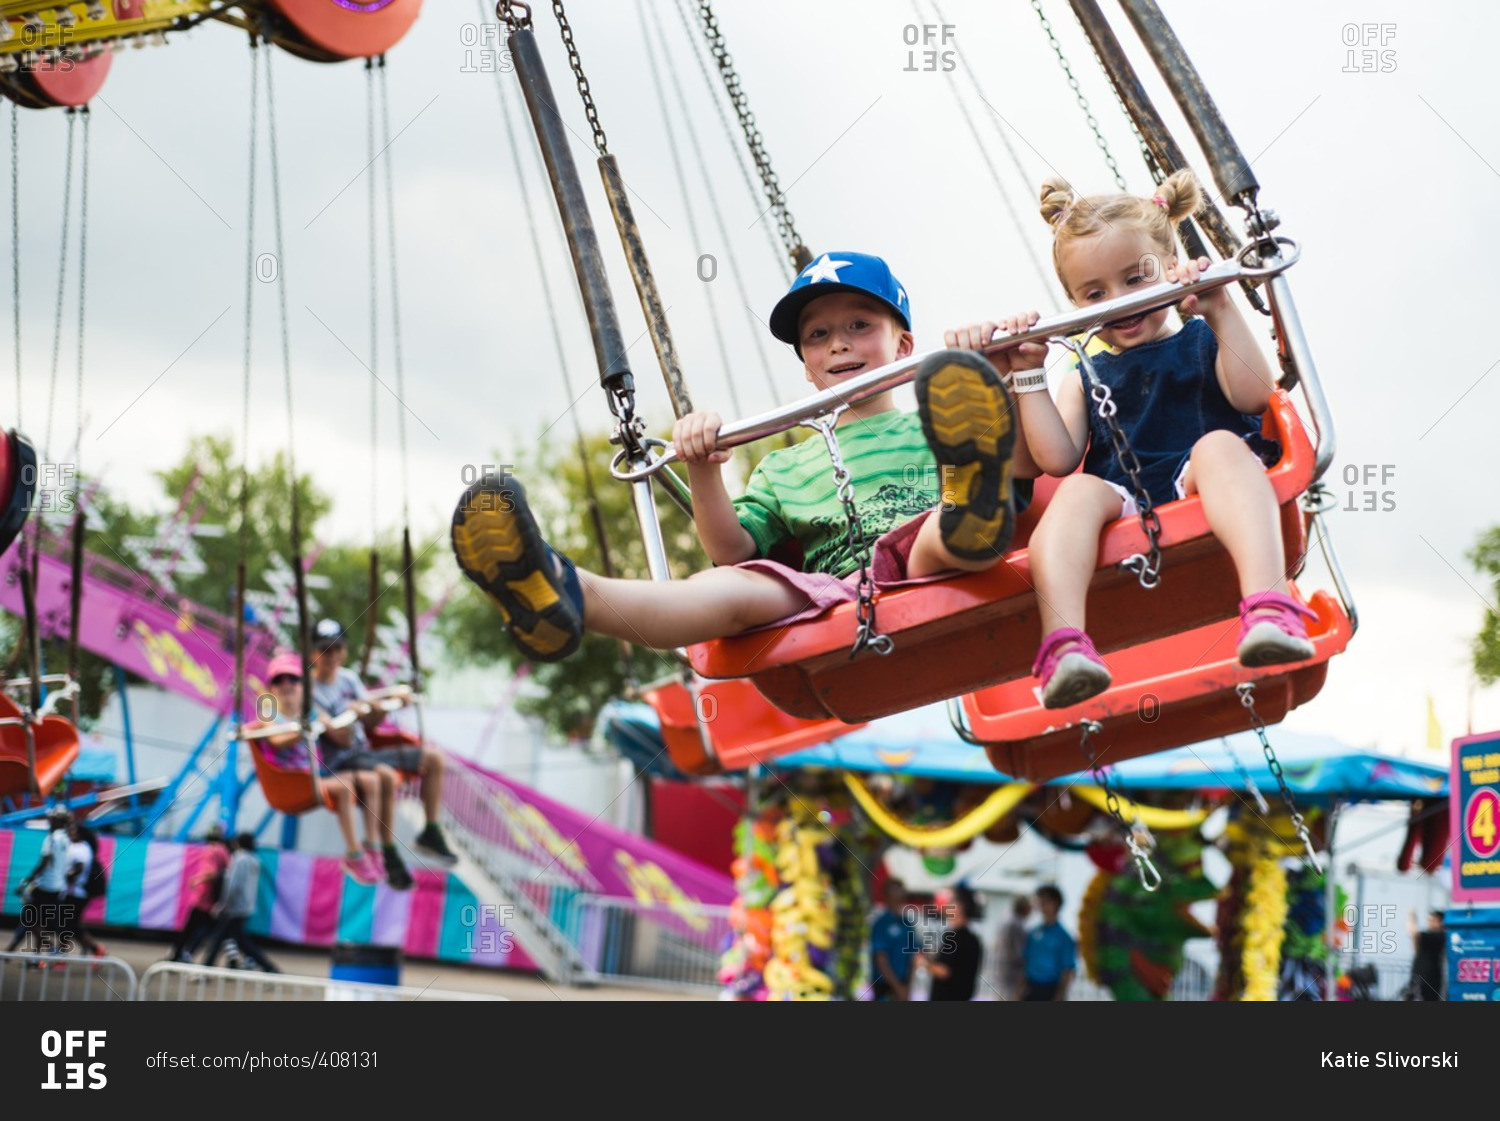 Children riding on a carnival swing